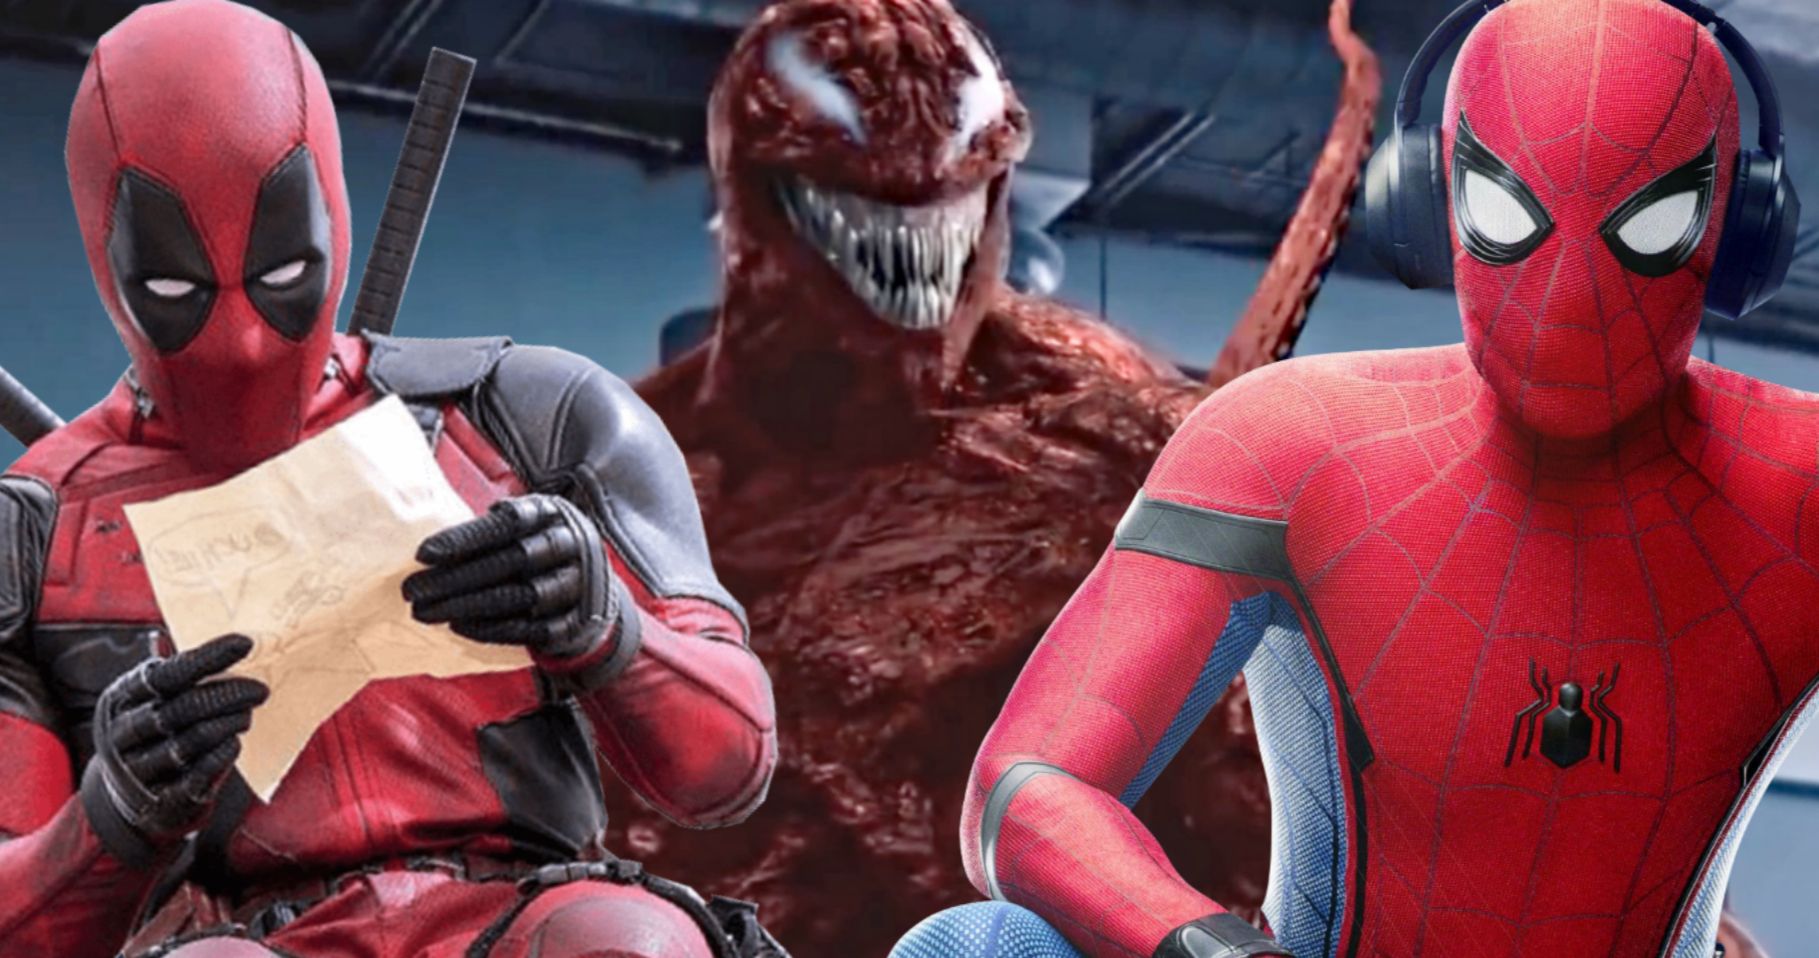 Sinister Six Fan-Made Trailer Unleashes Carnage While Uniting Spider-Man and Deadpool